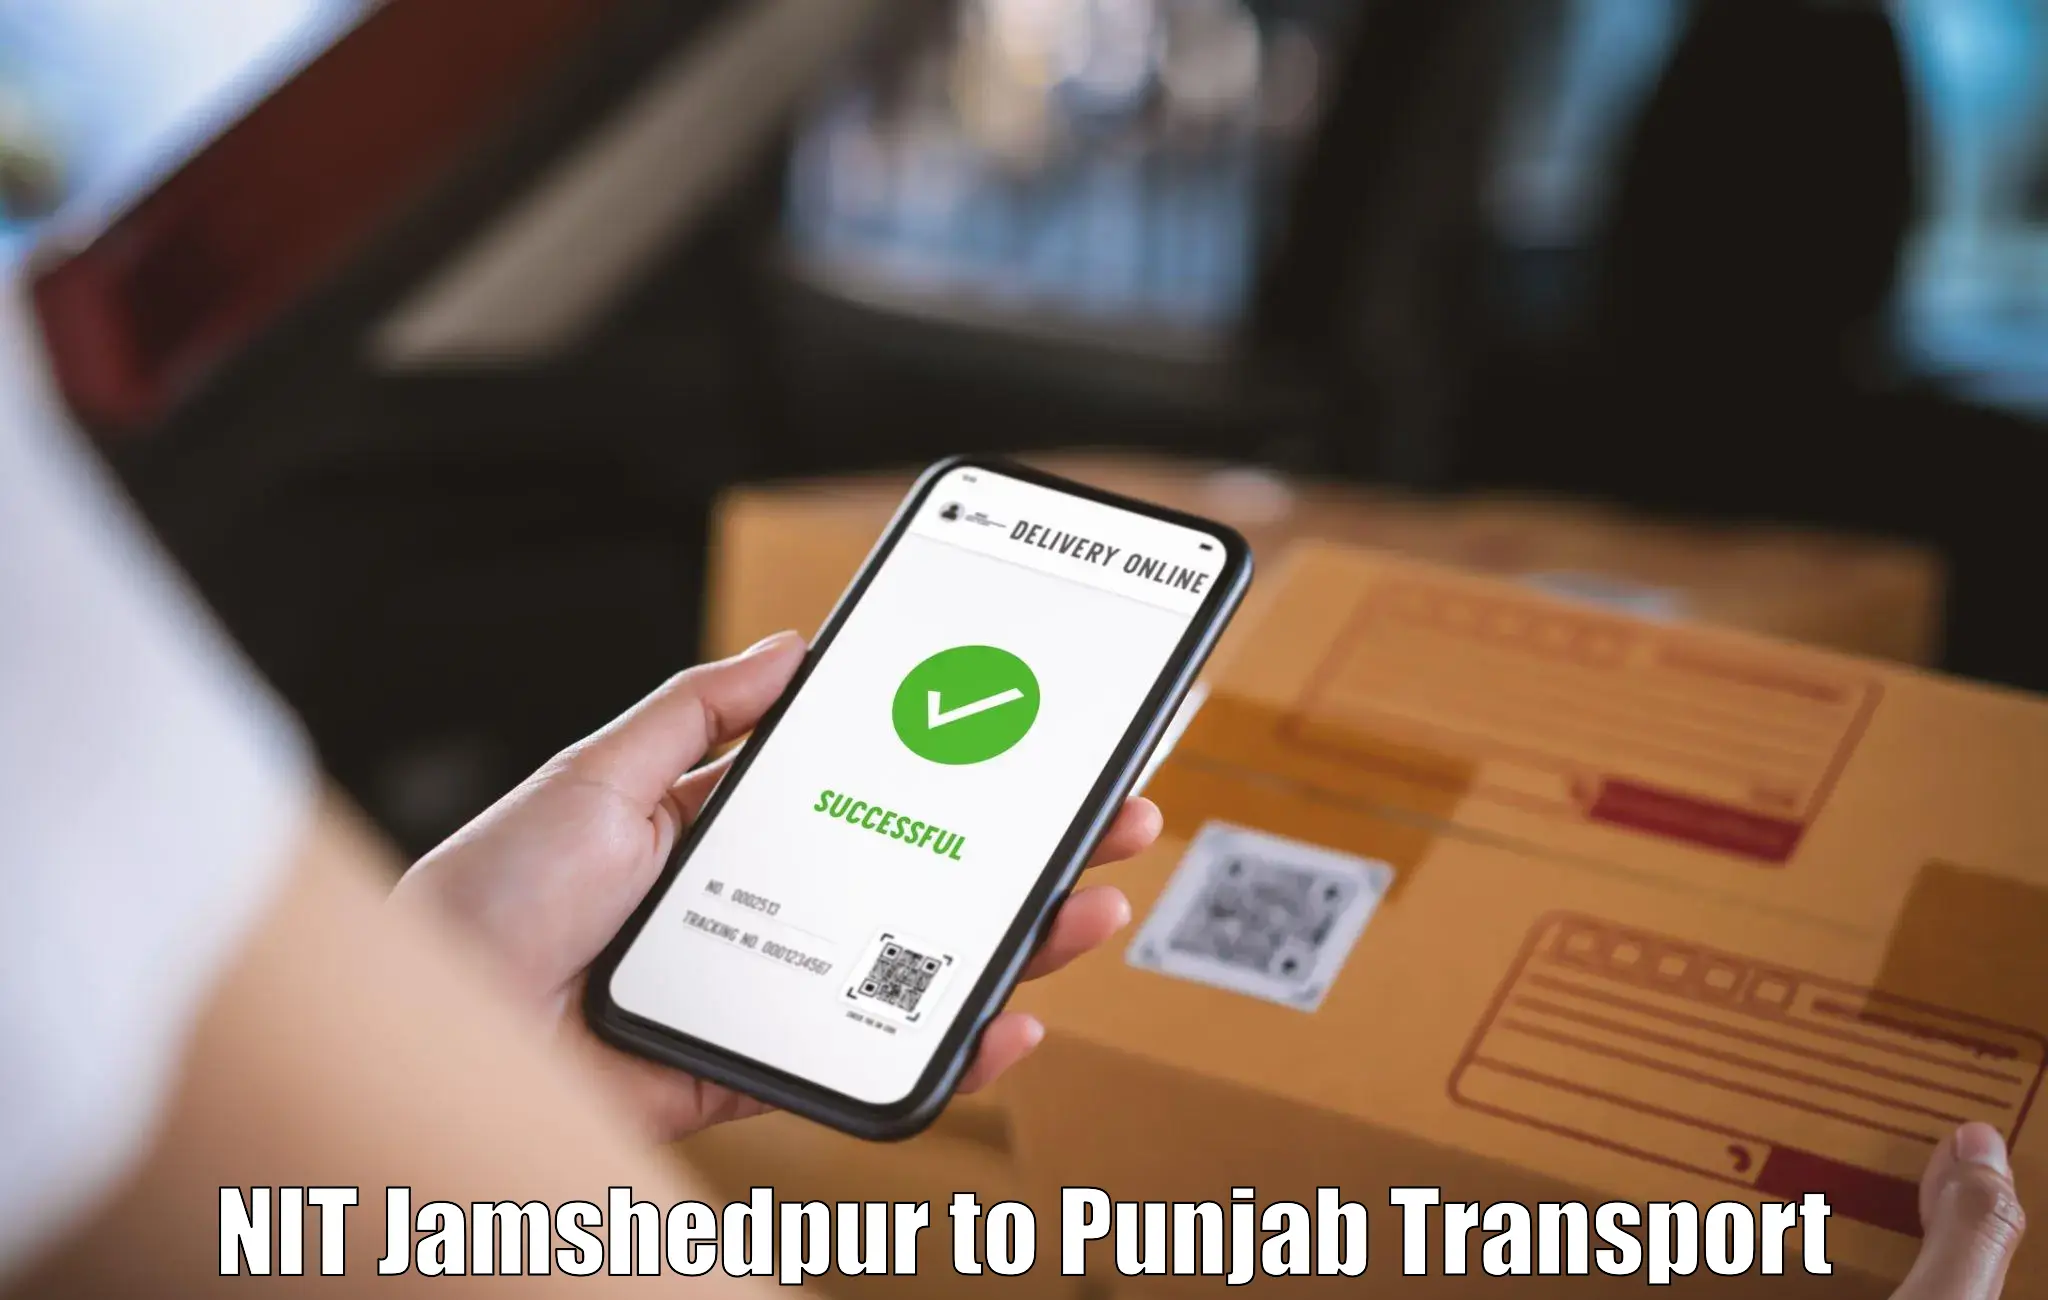 Air freight transport services in NIT Jamshedpur to Fatehgarh Sahib